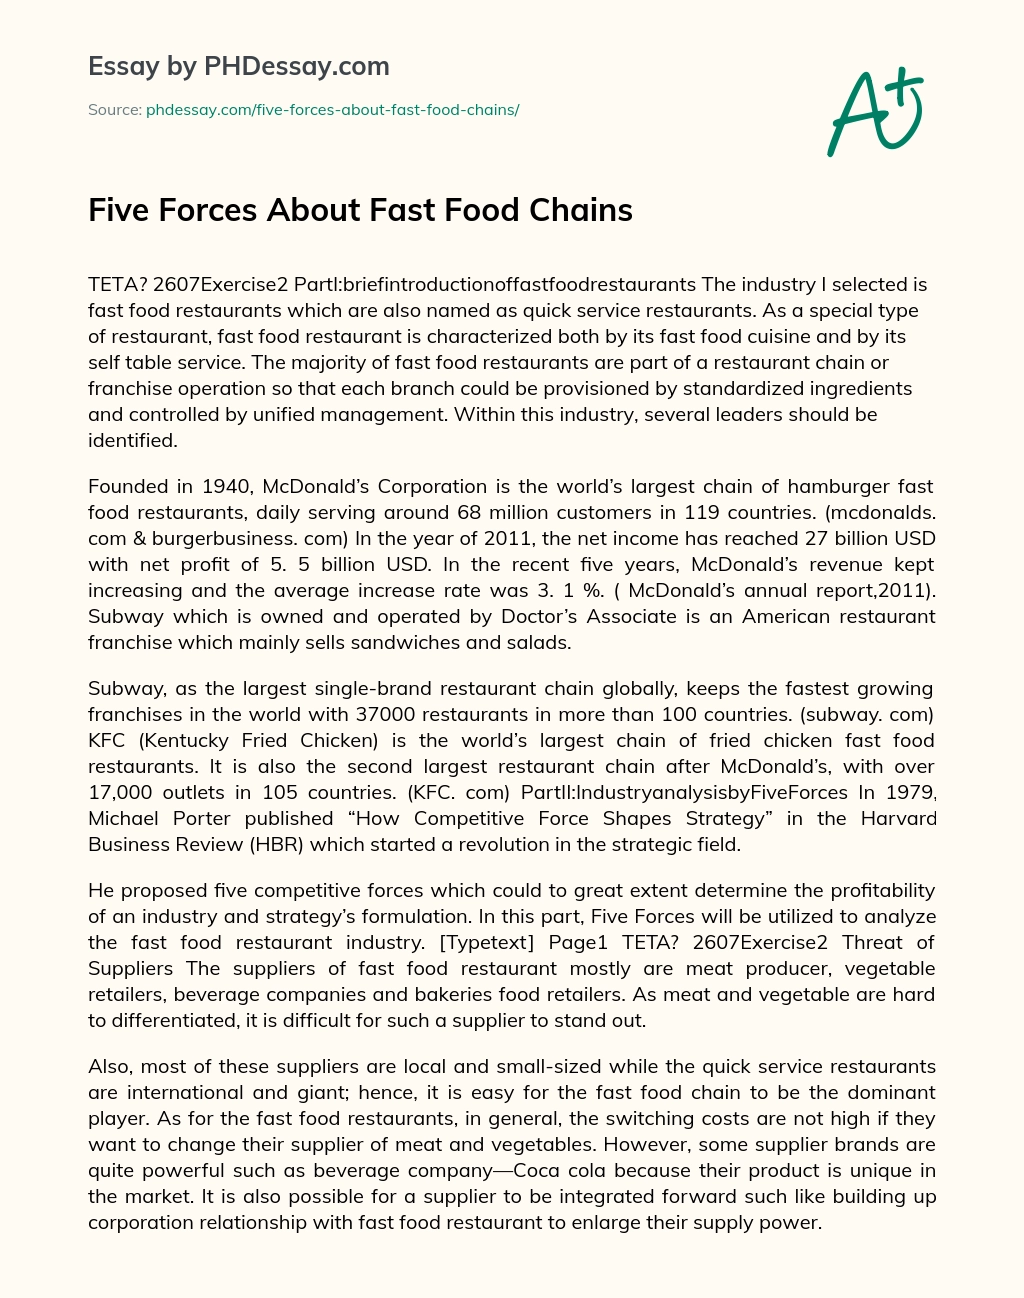 Five Forces About Fast Food Chains essay